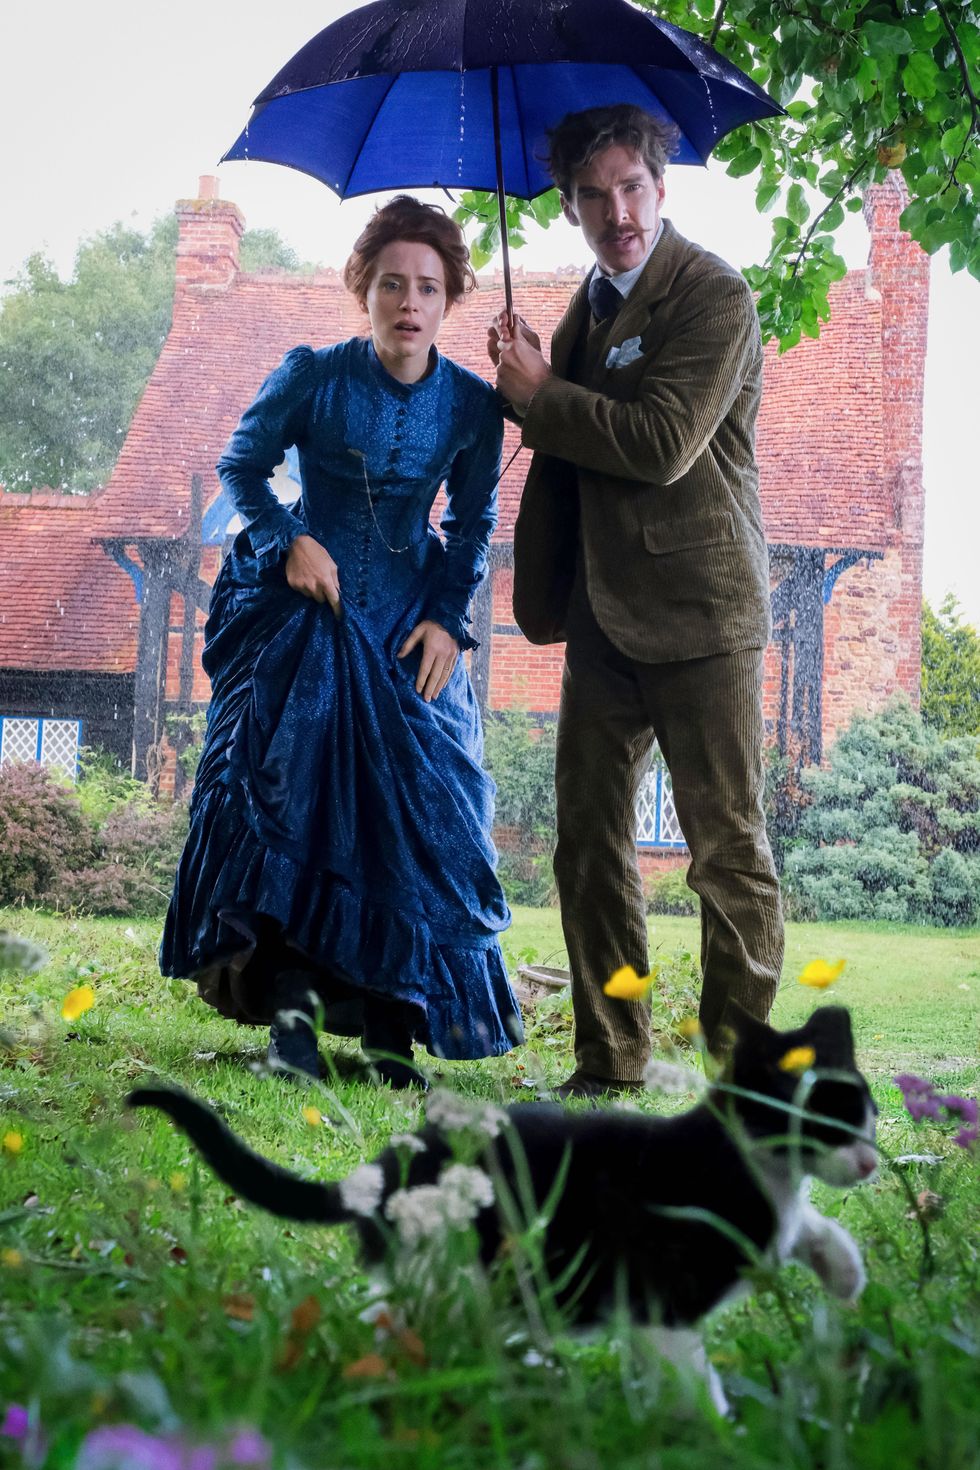 Claire Foy (left) and Benedict Cumberbatch (right) discover a stray kitten on their lawn in the middle of the rain. Benedict holds a blue umbrella.